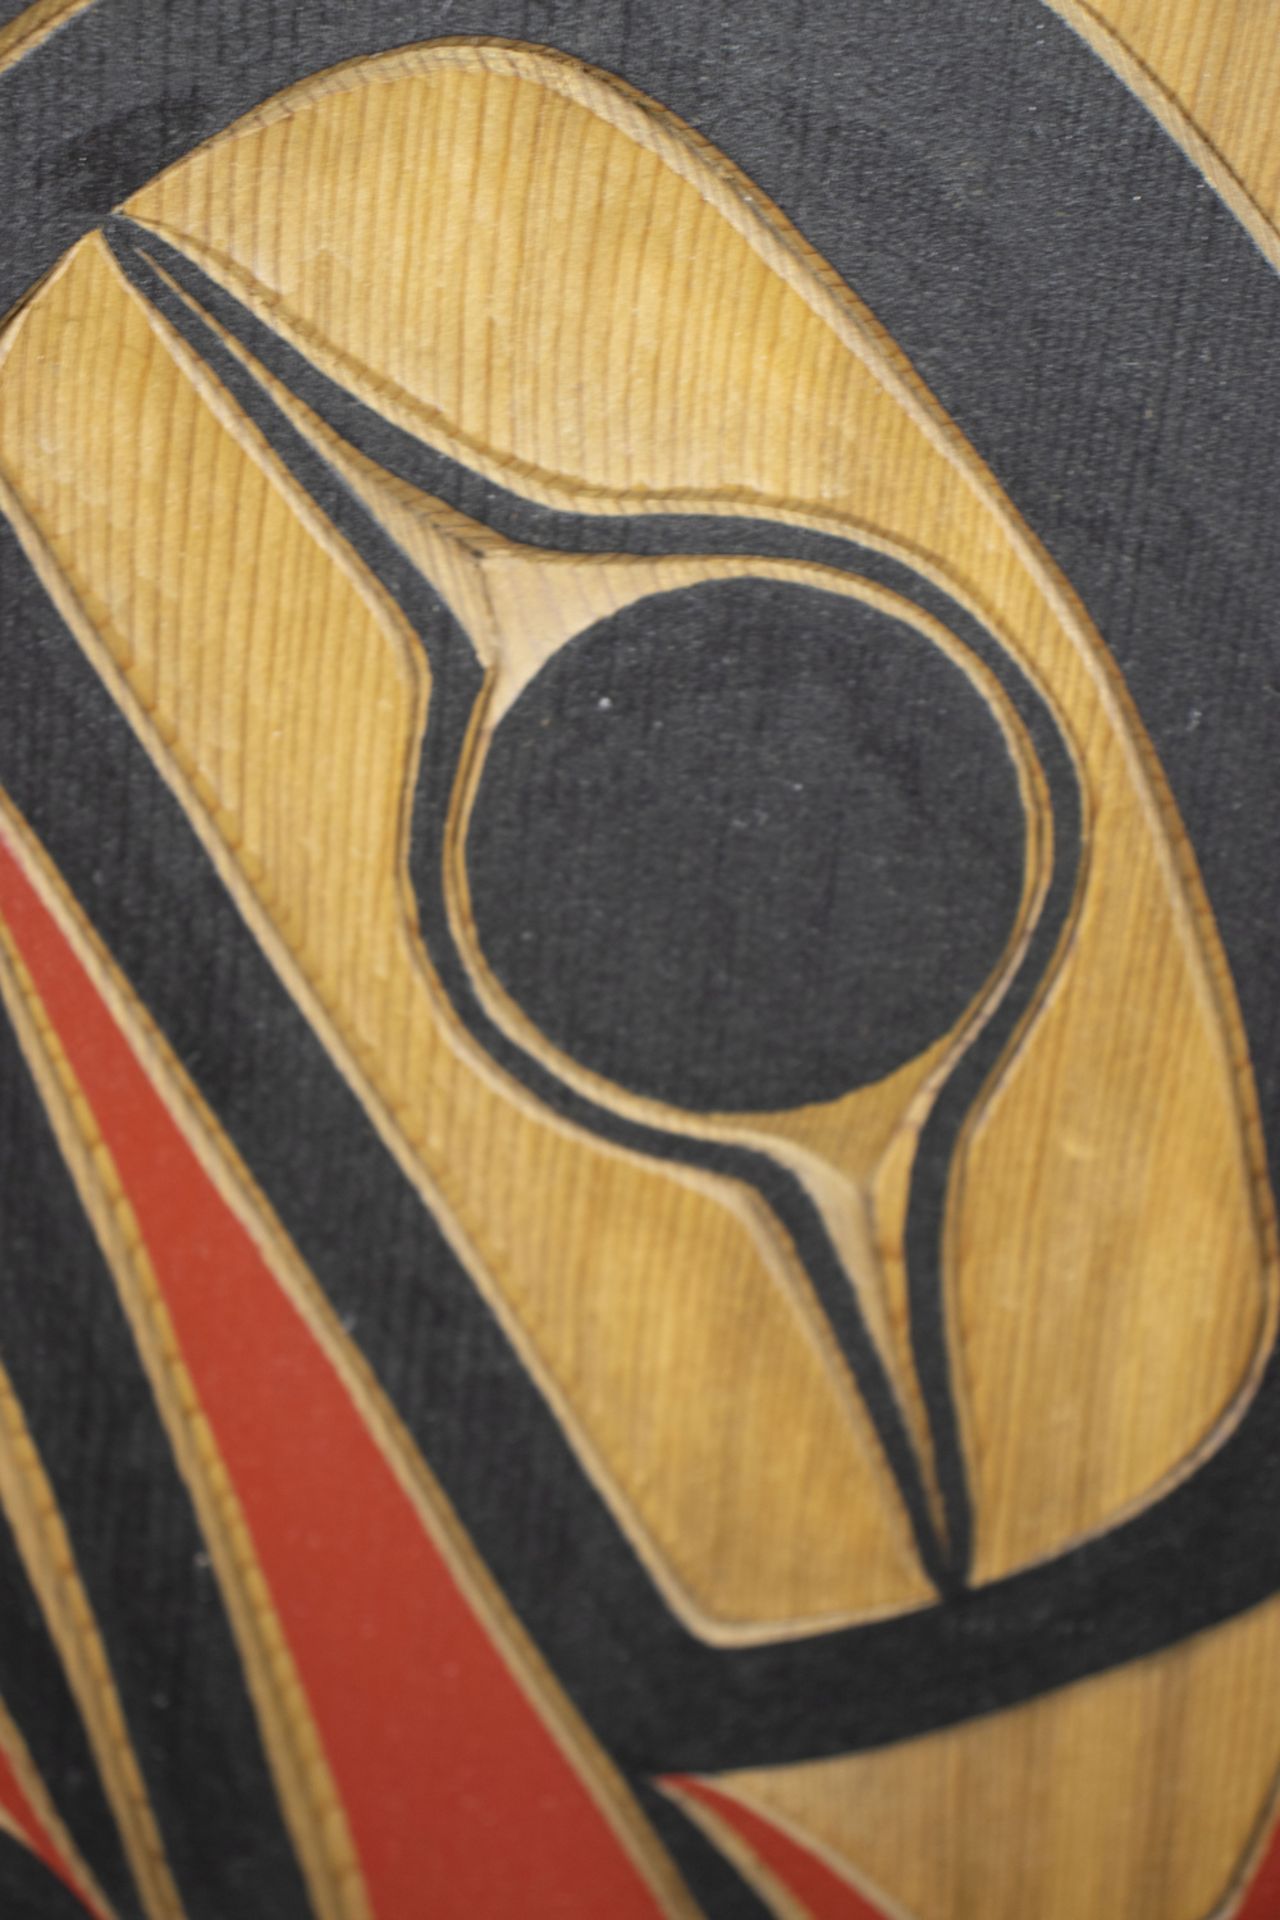 James ADAMS (20. Jh.), Holzrelief 'Rabe' / A wooden relief 'Raven', Canada, 1998 - Image 4 of 5